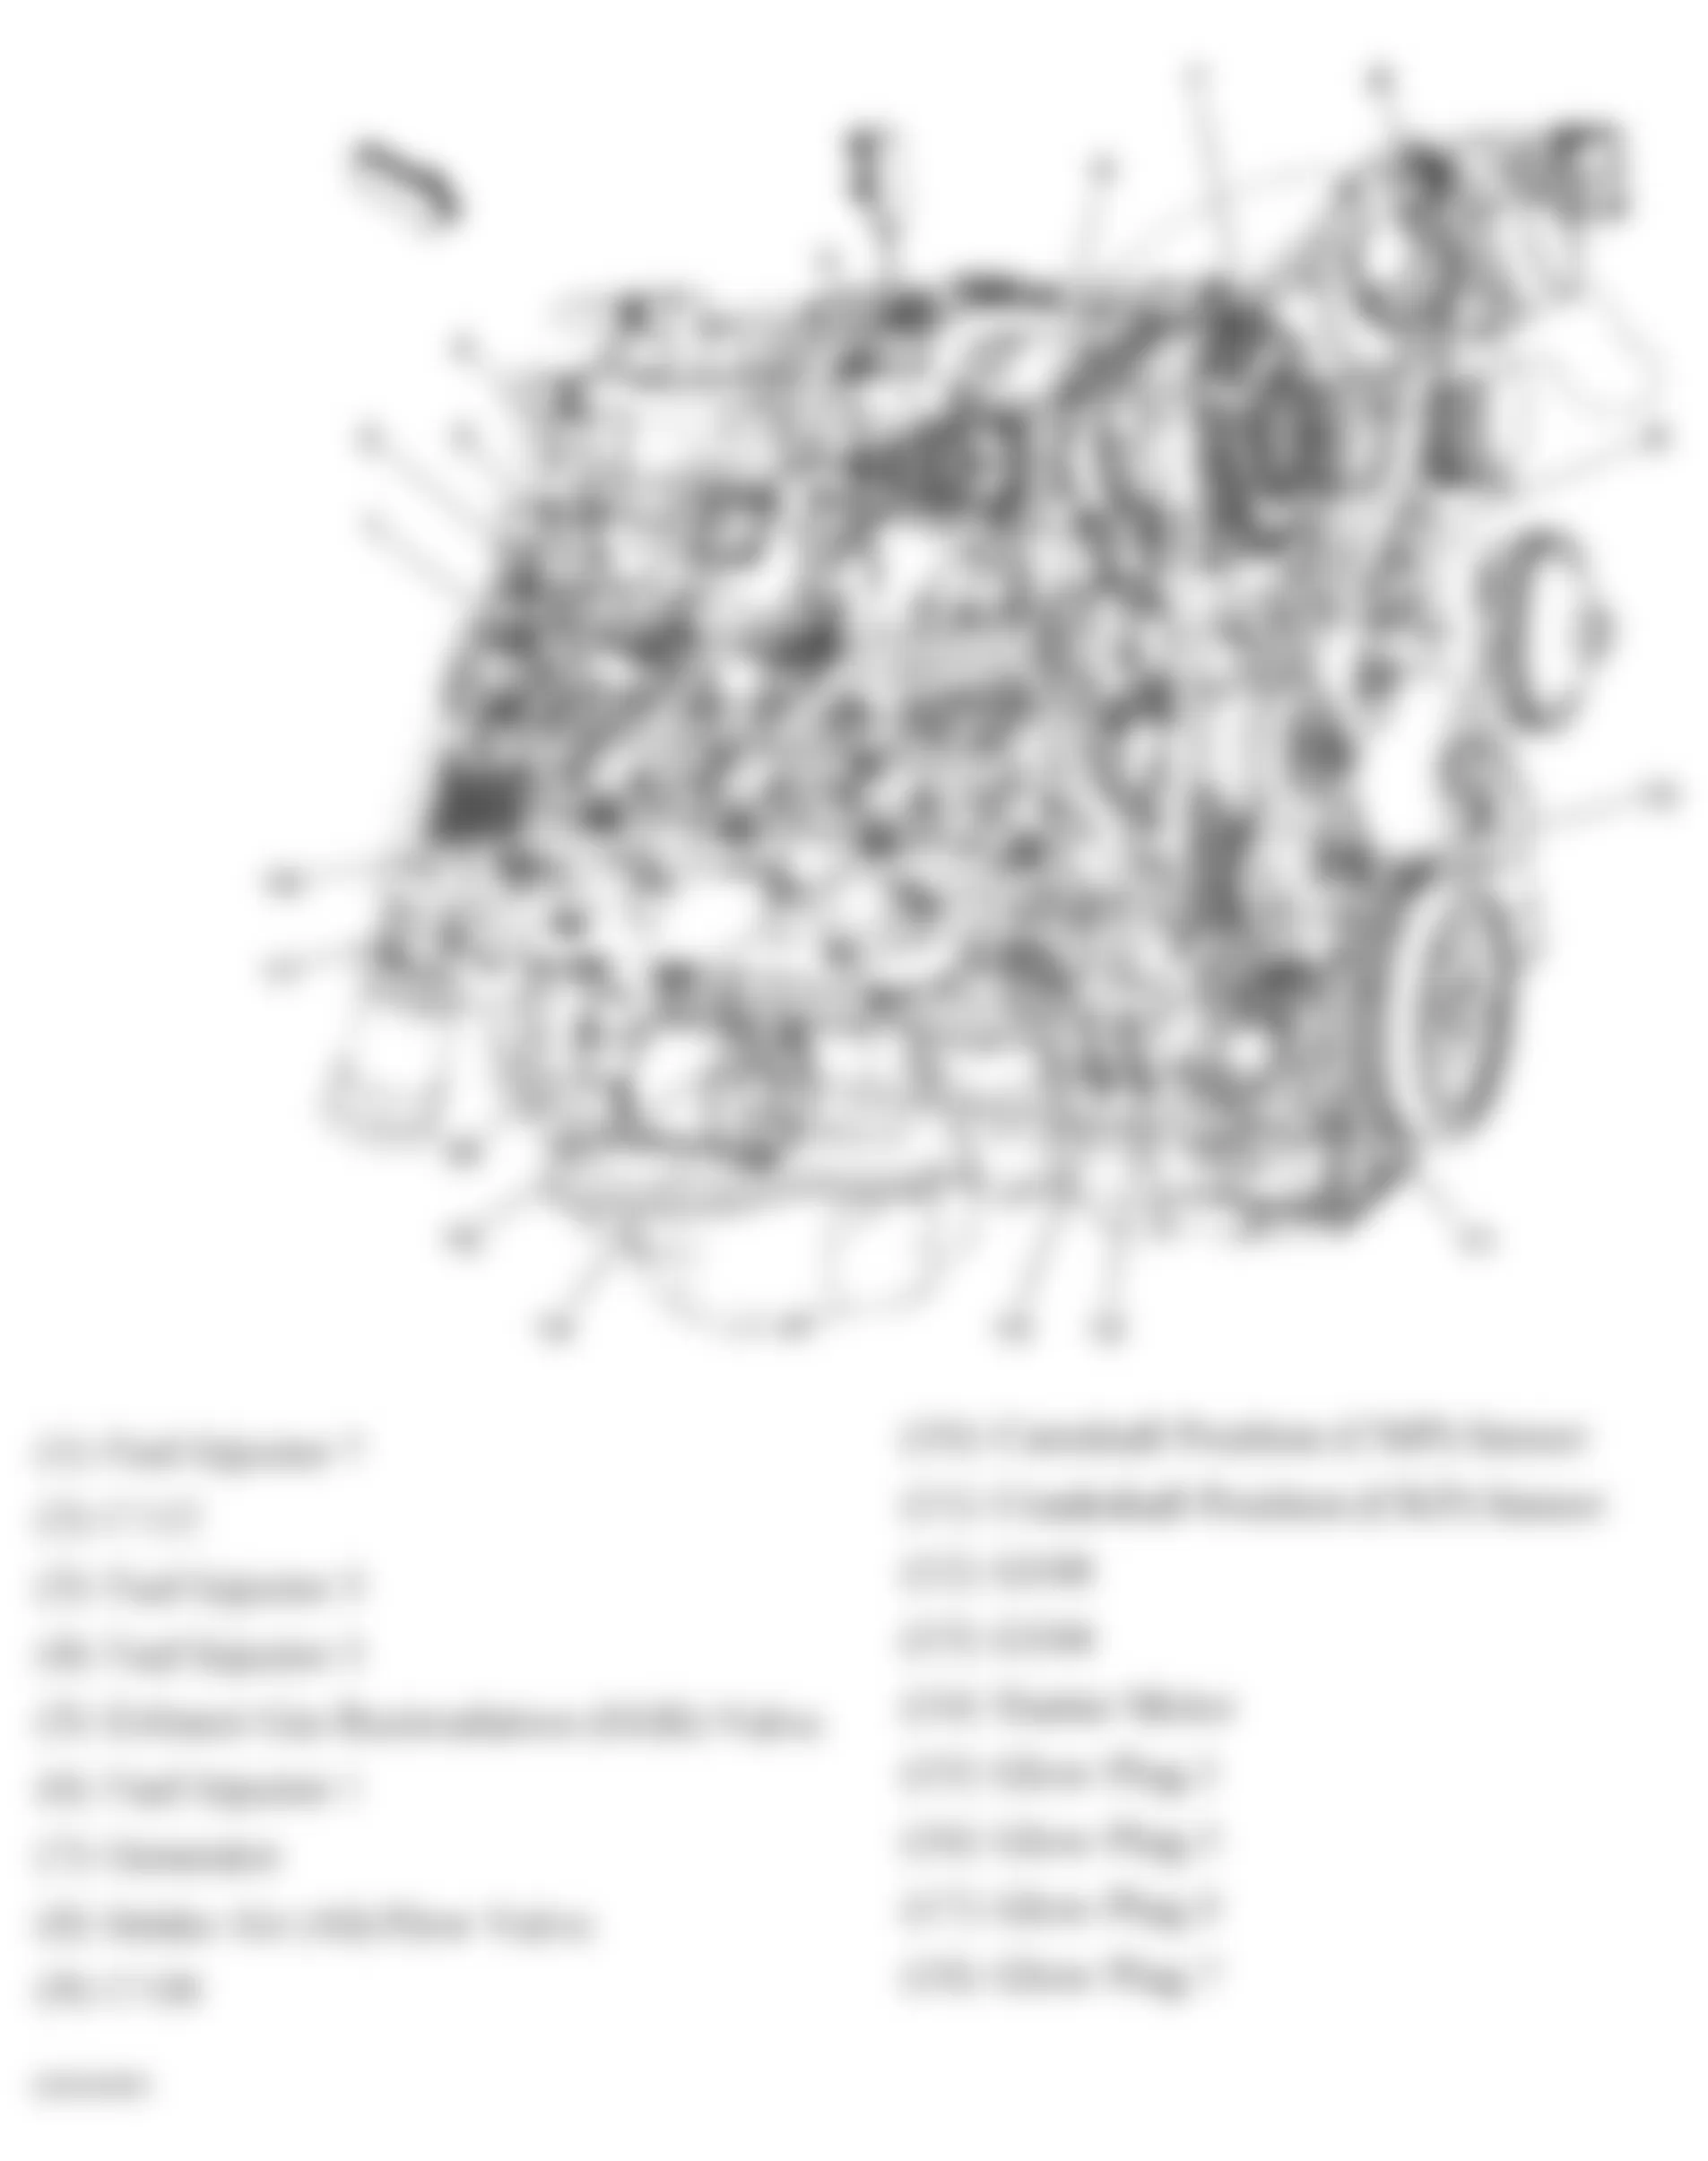 GMC Savana G3500 2007 - Component Locations -  Right Side Of Engine (6.6L)